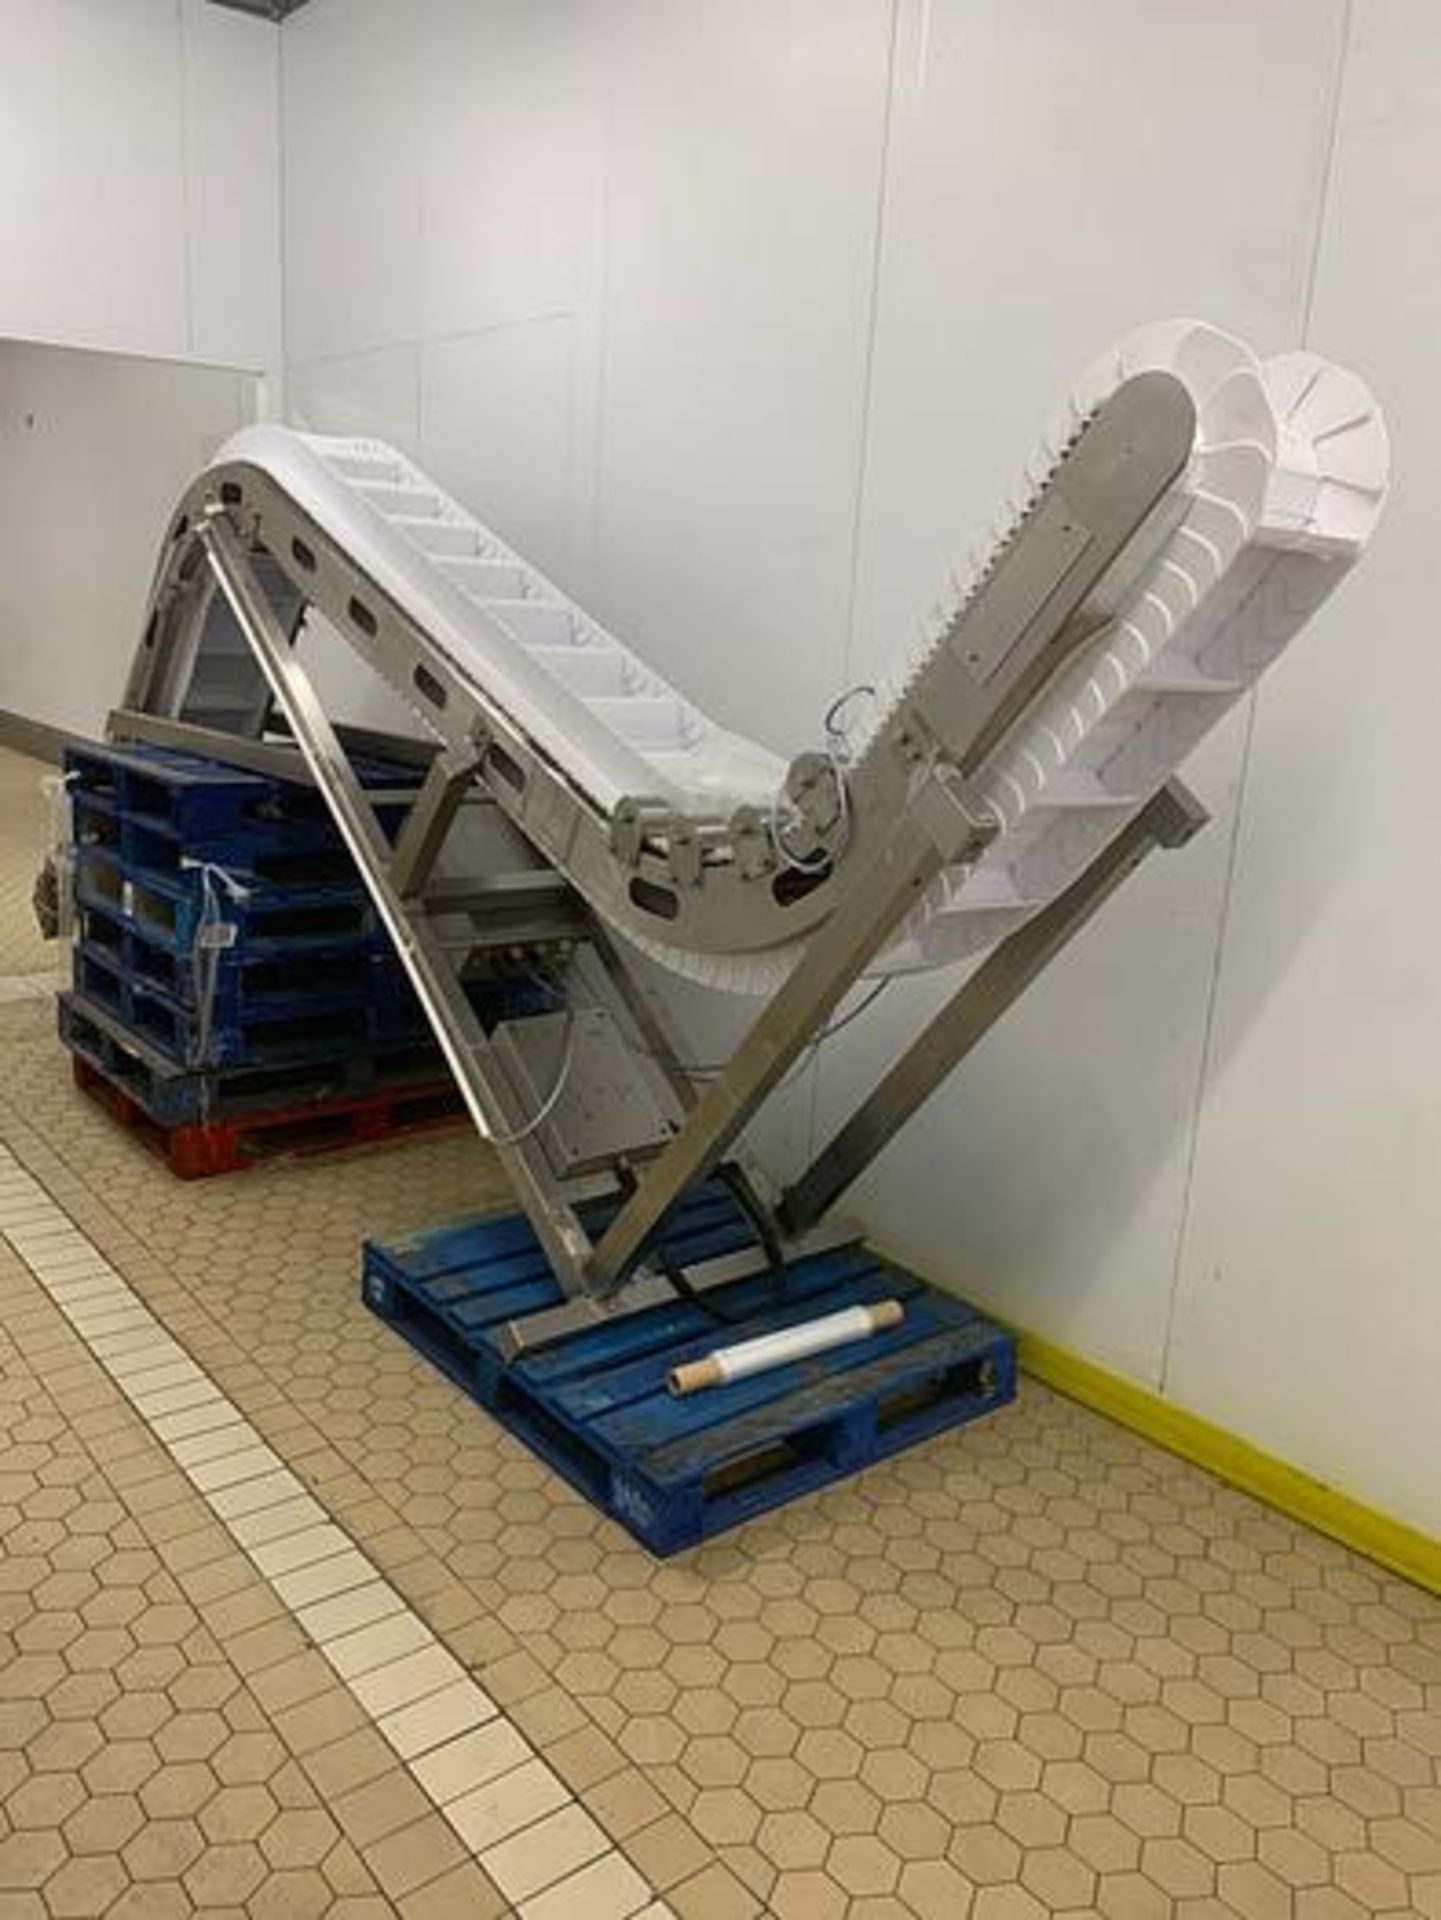 2000 BILWINCO DW60/10-D PORTABLE MULTIHEAD WEIGHER WITH ELEVATOR - Image 11 of 12